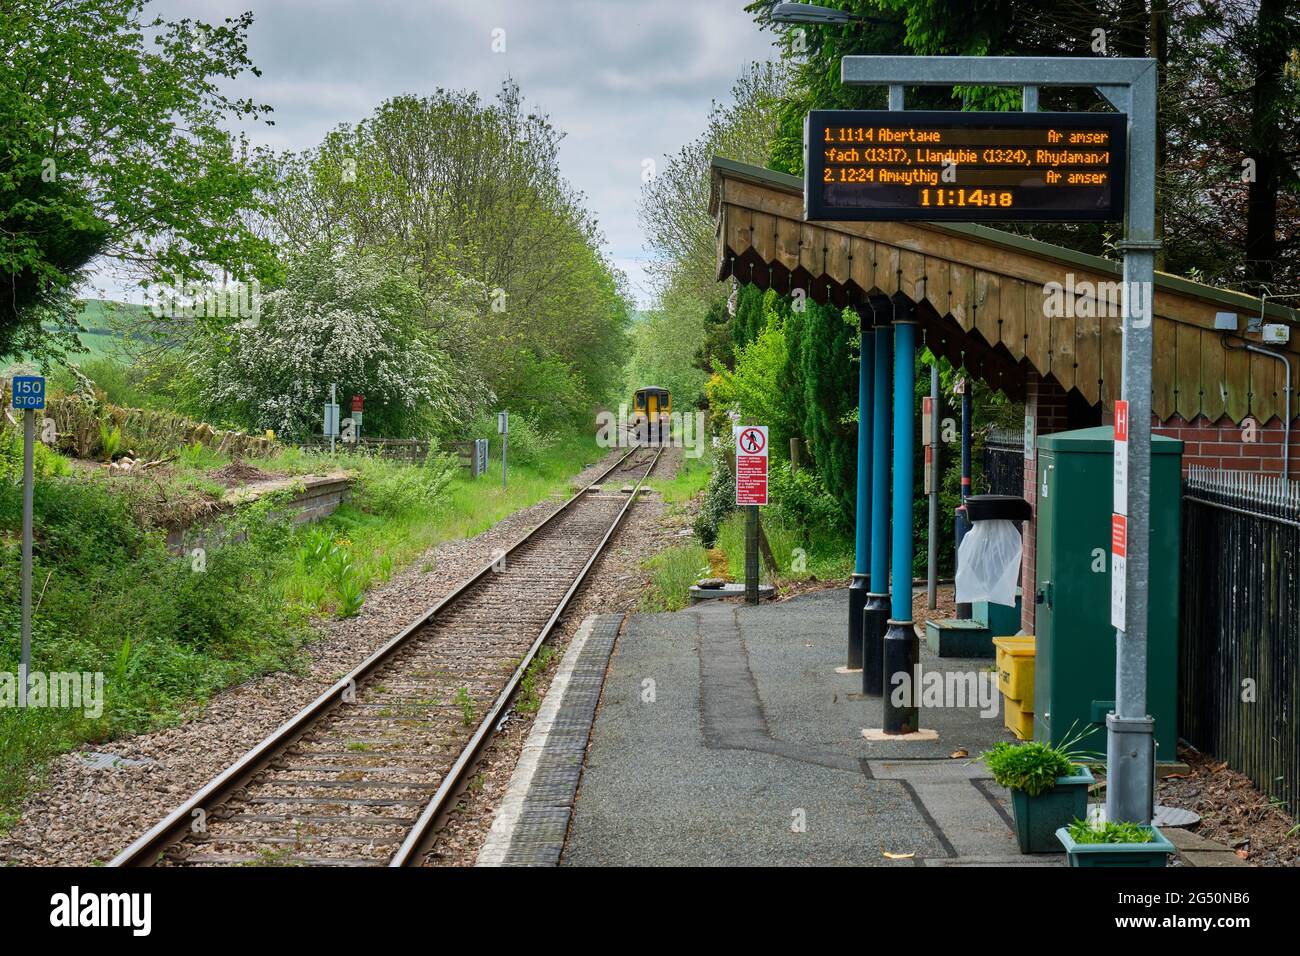 Train departing Llangynllo Station on the Heart of Wales Line, Llangynllo, Powys, Wales. Stock Photo